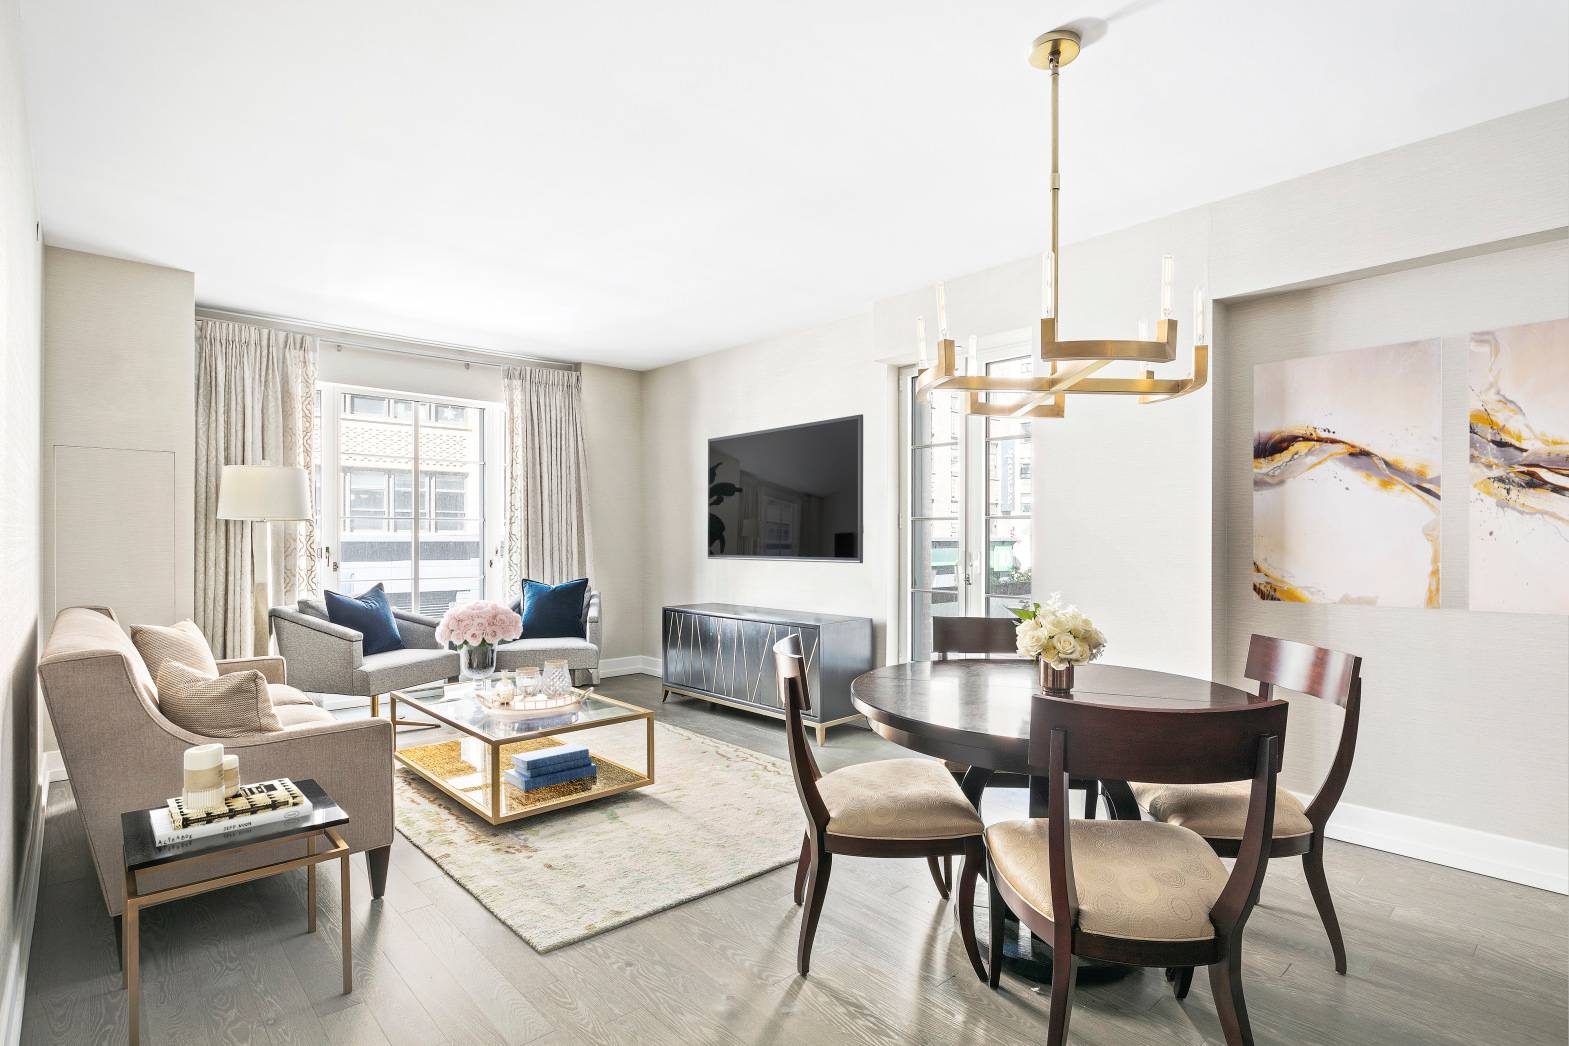 Serene luxury living and a wealth of amenities define this expansive two bedroom, two bathroom residence in a full service Hudson Square condop.